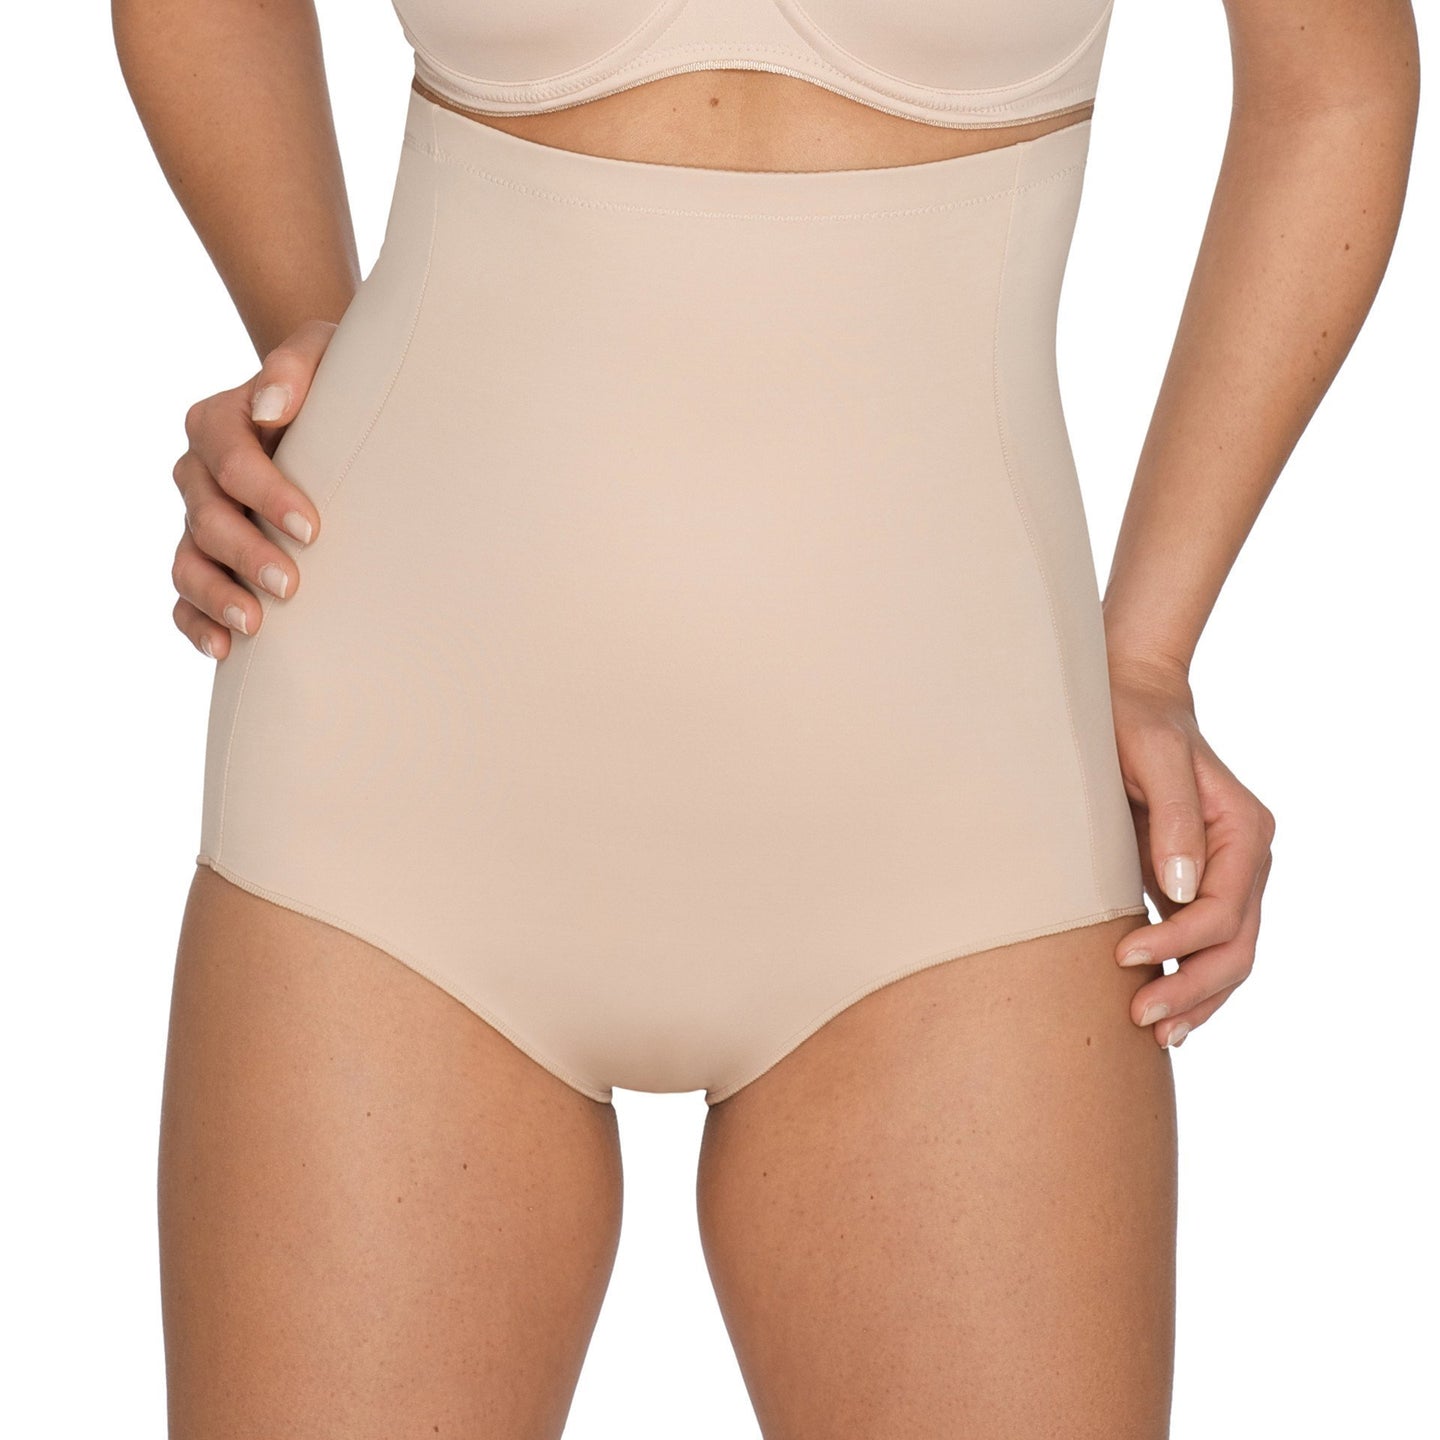 Caffé Latte. Elegant super figure-fixing panty girdle with a smart, smooth look. Worn just below the bra. It shapes tummy and waist to create a slim, flowing figure. The smooth finish over the stomach ensures it does not show under clothing. Its superior design guarantees that it does not roll down!  Fabric content: Polyamide: 59%, Elastane: 39%, Cotton: 2%